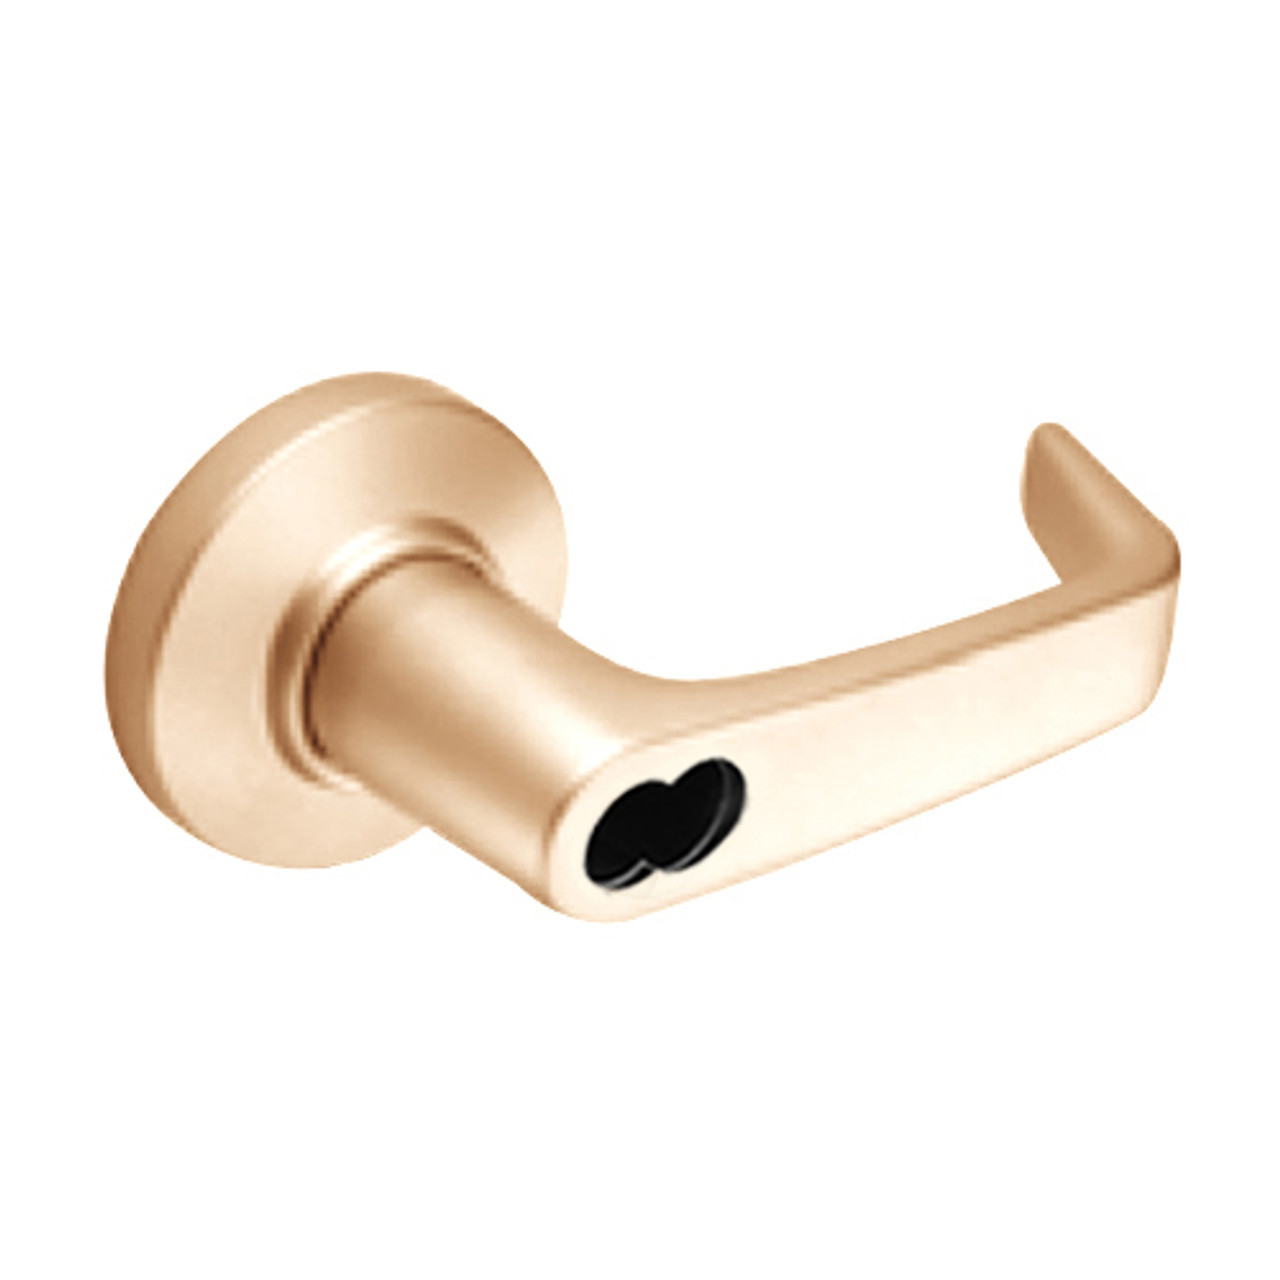 9K57A15CSTK611LM Best 9K Series Dormitory or Storeroom Cylindrical Lever Locks with Contour Angle with Return Lever Design Accept 7 Pin Best Core in Bright Bronze